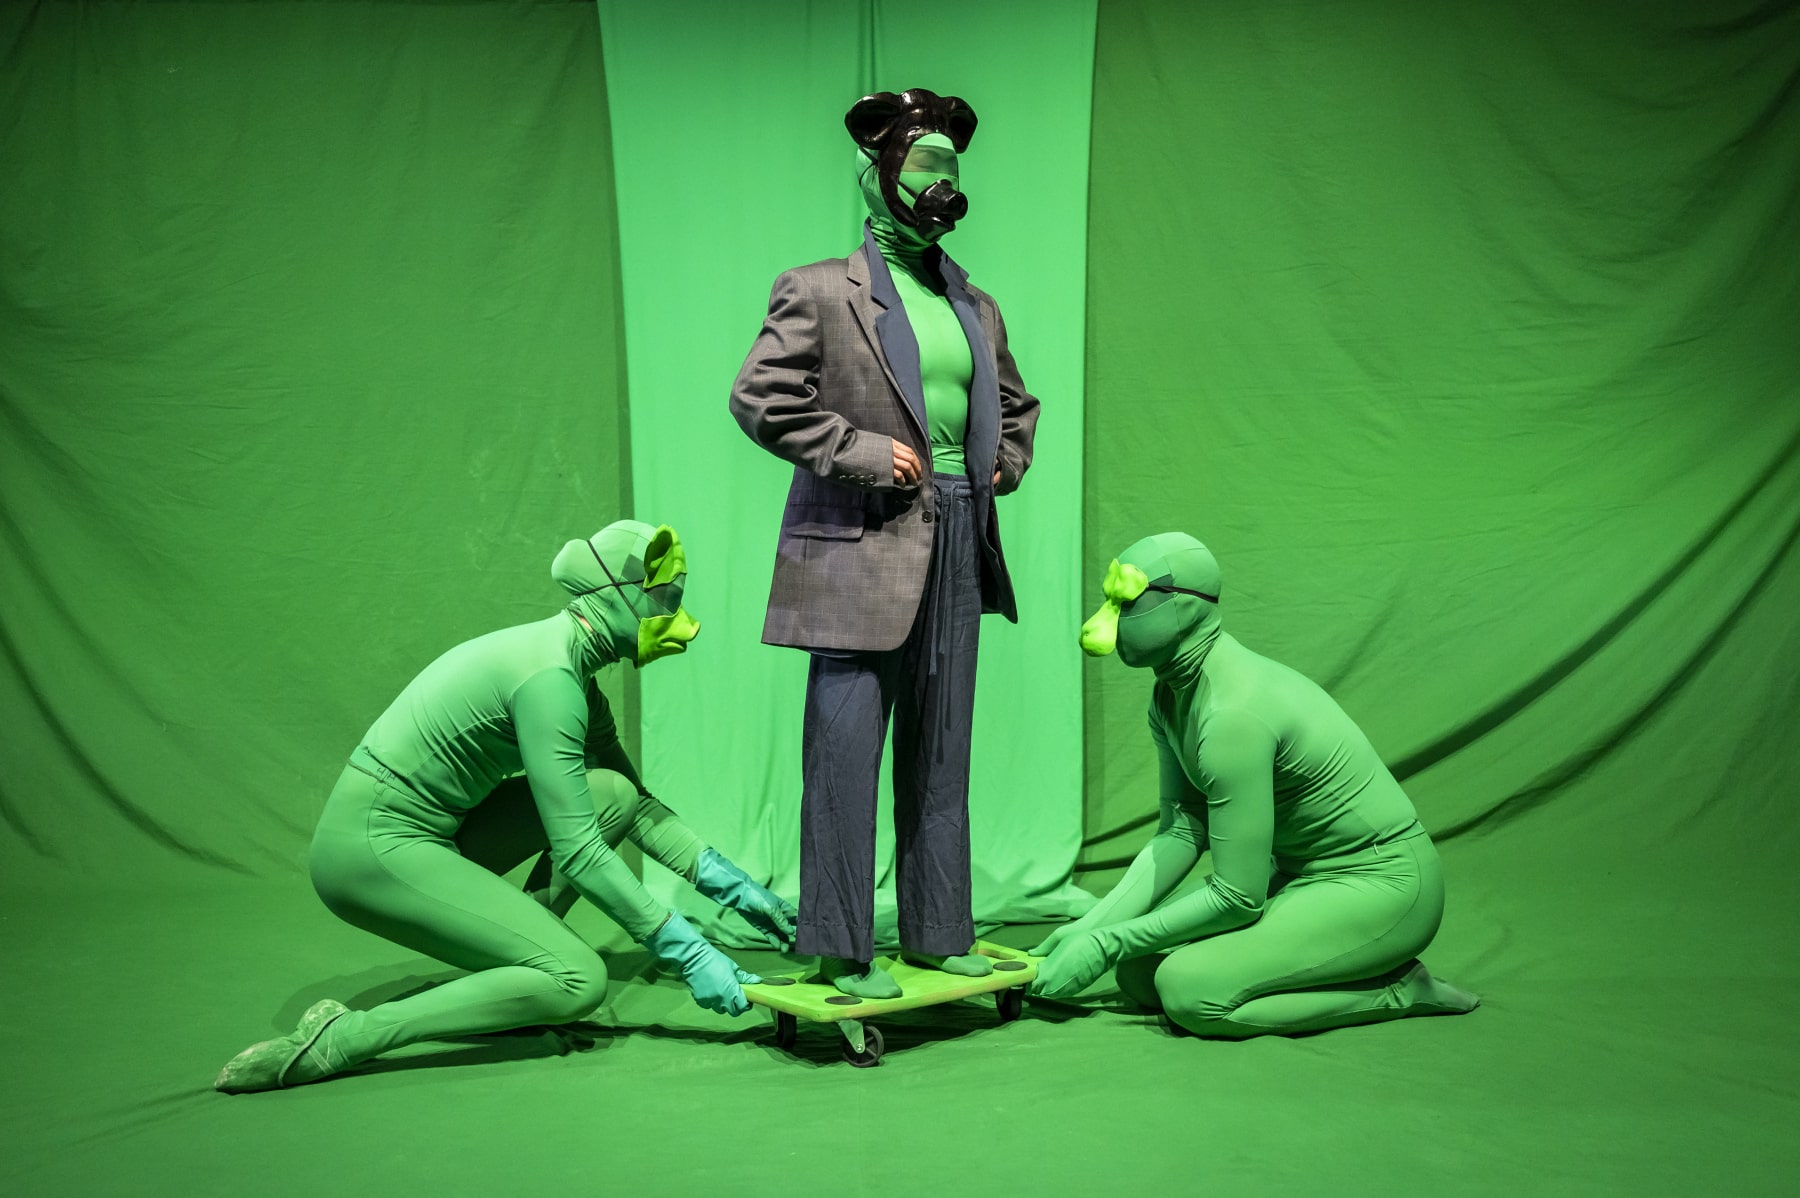 Three people are in front of a green screen dressed in skin-tight green suits and animal masks. The person in the middle wears a grey suit over the top and is standing on a green trolley. The two other people are crouched on either side of them holding the trolley.